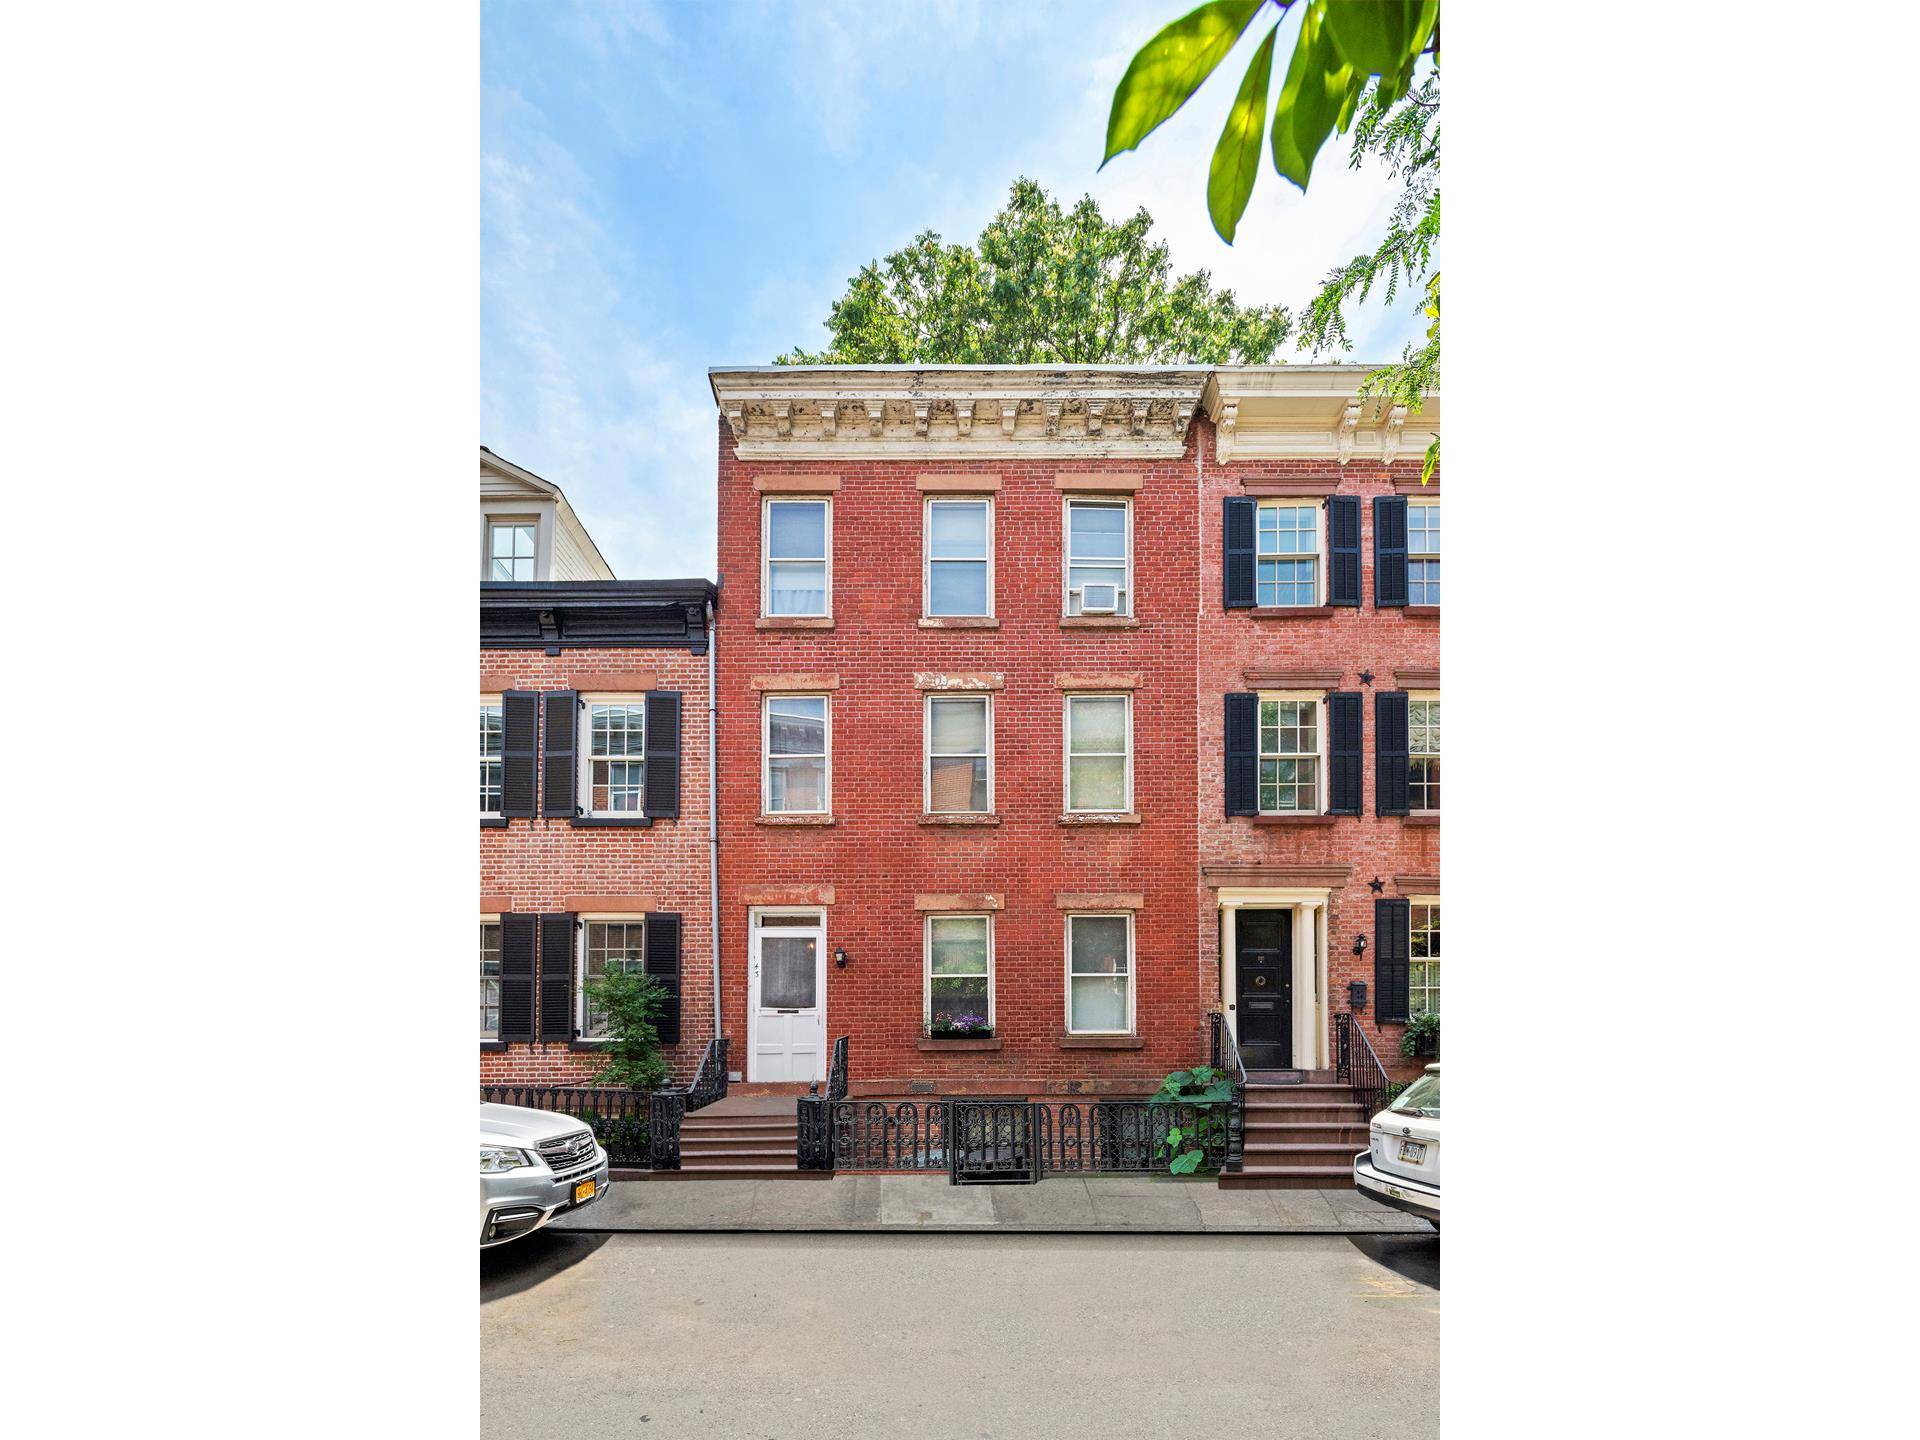 This home offers a rare opportunity to create the single family townhouse of your dreams on one of the most idyllic streets in the West Village.